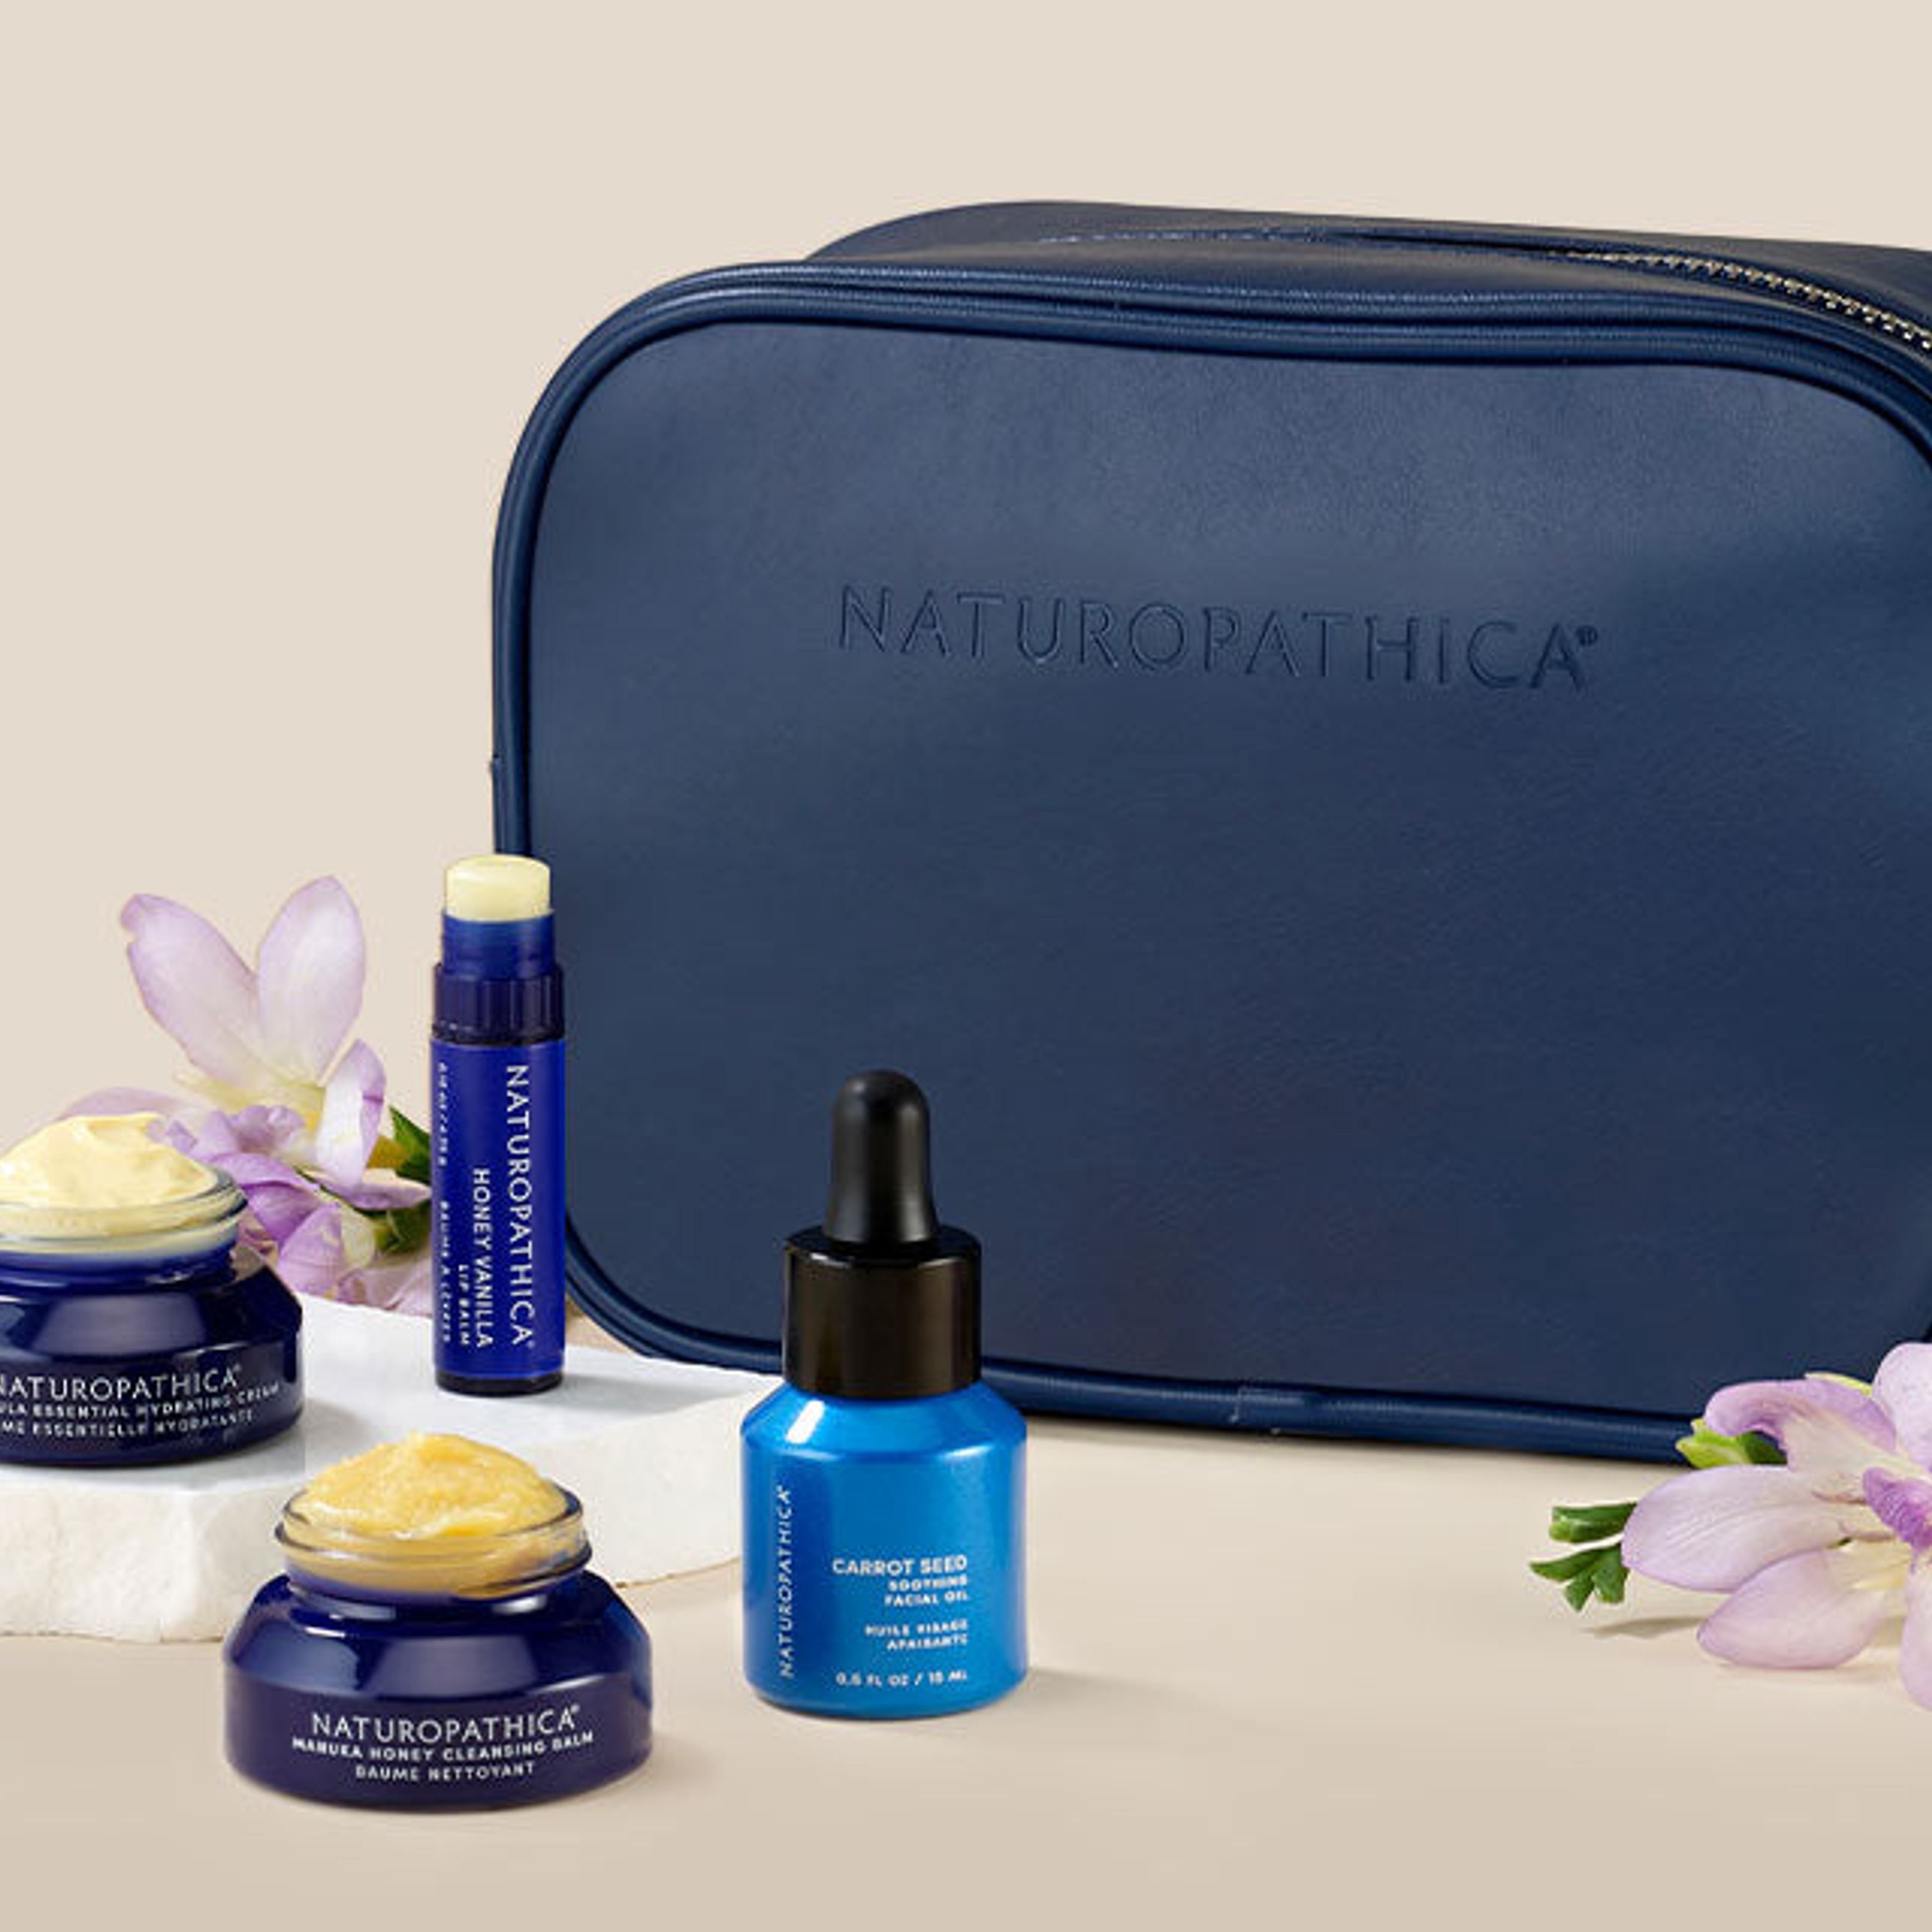 The Skin Soothing Set